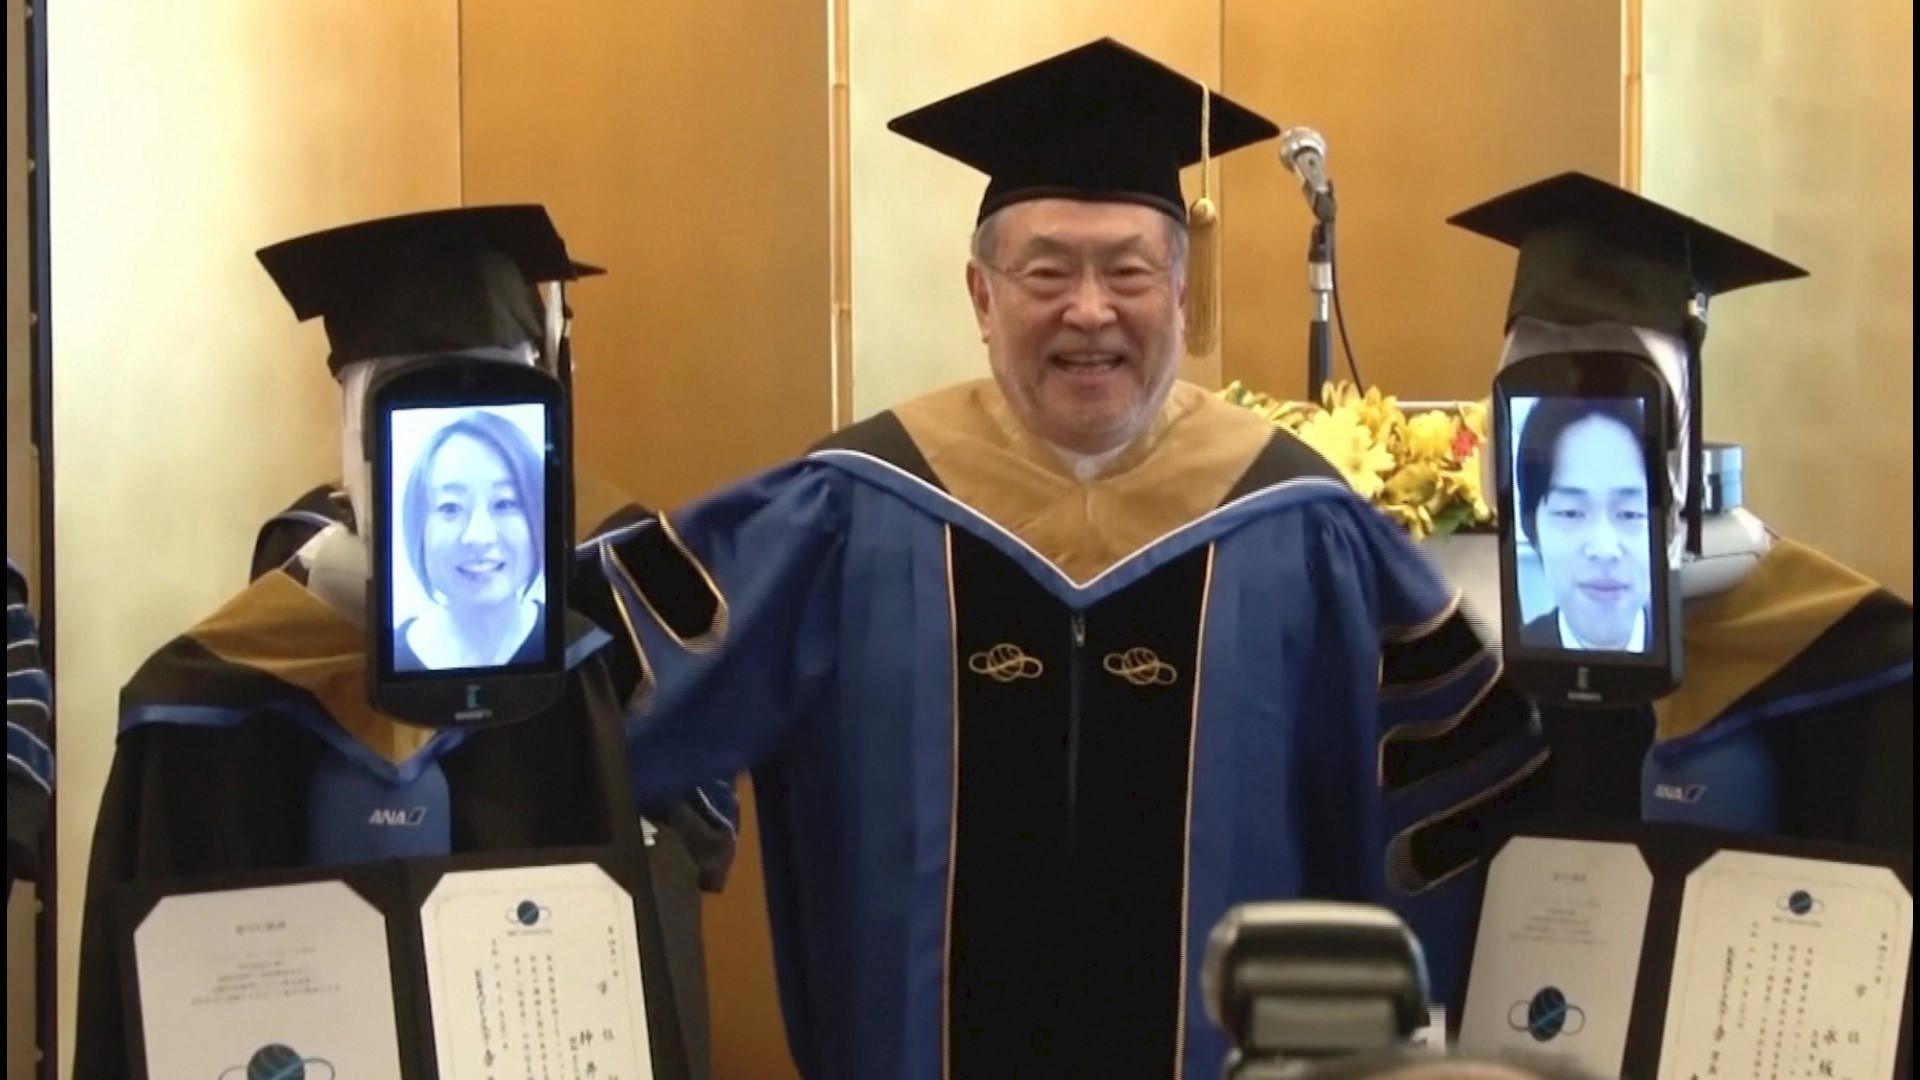 As the coronavirus continues to affect millions across the world, students from the Business Breakthrough University in Tokyo got to graduate through avatar robots. Buzz60's Maria Mercedes Galuppo has the story.